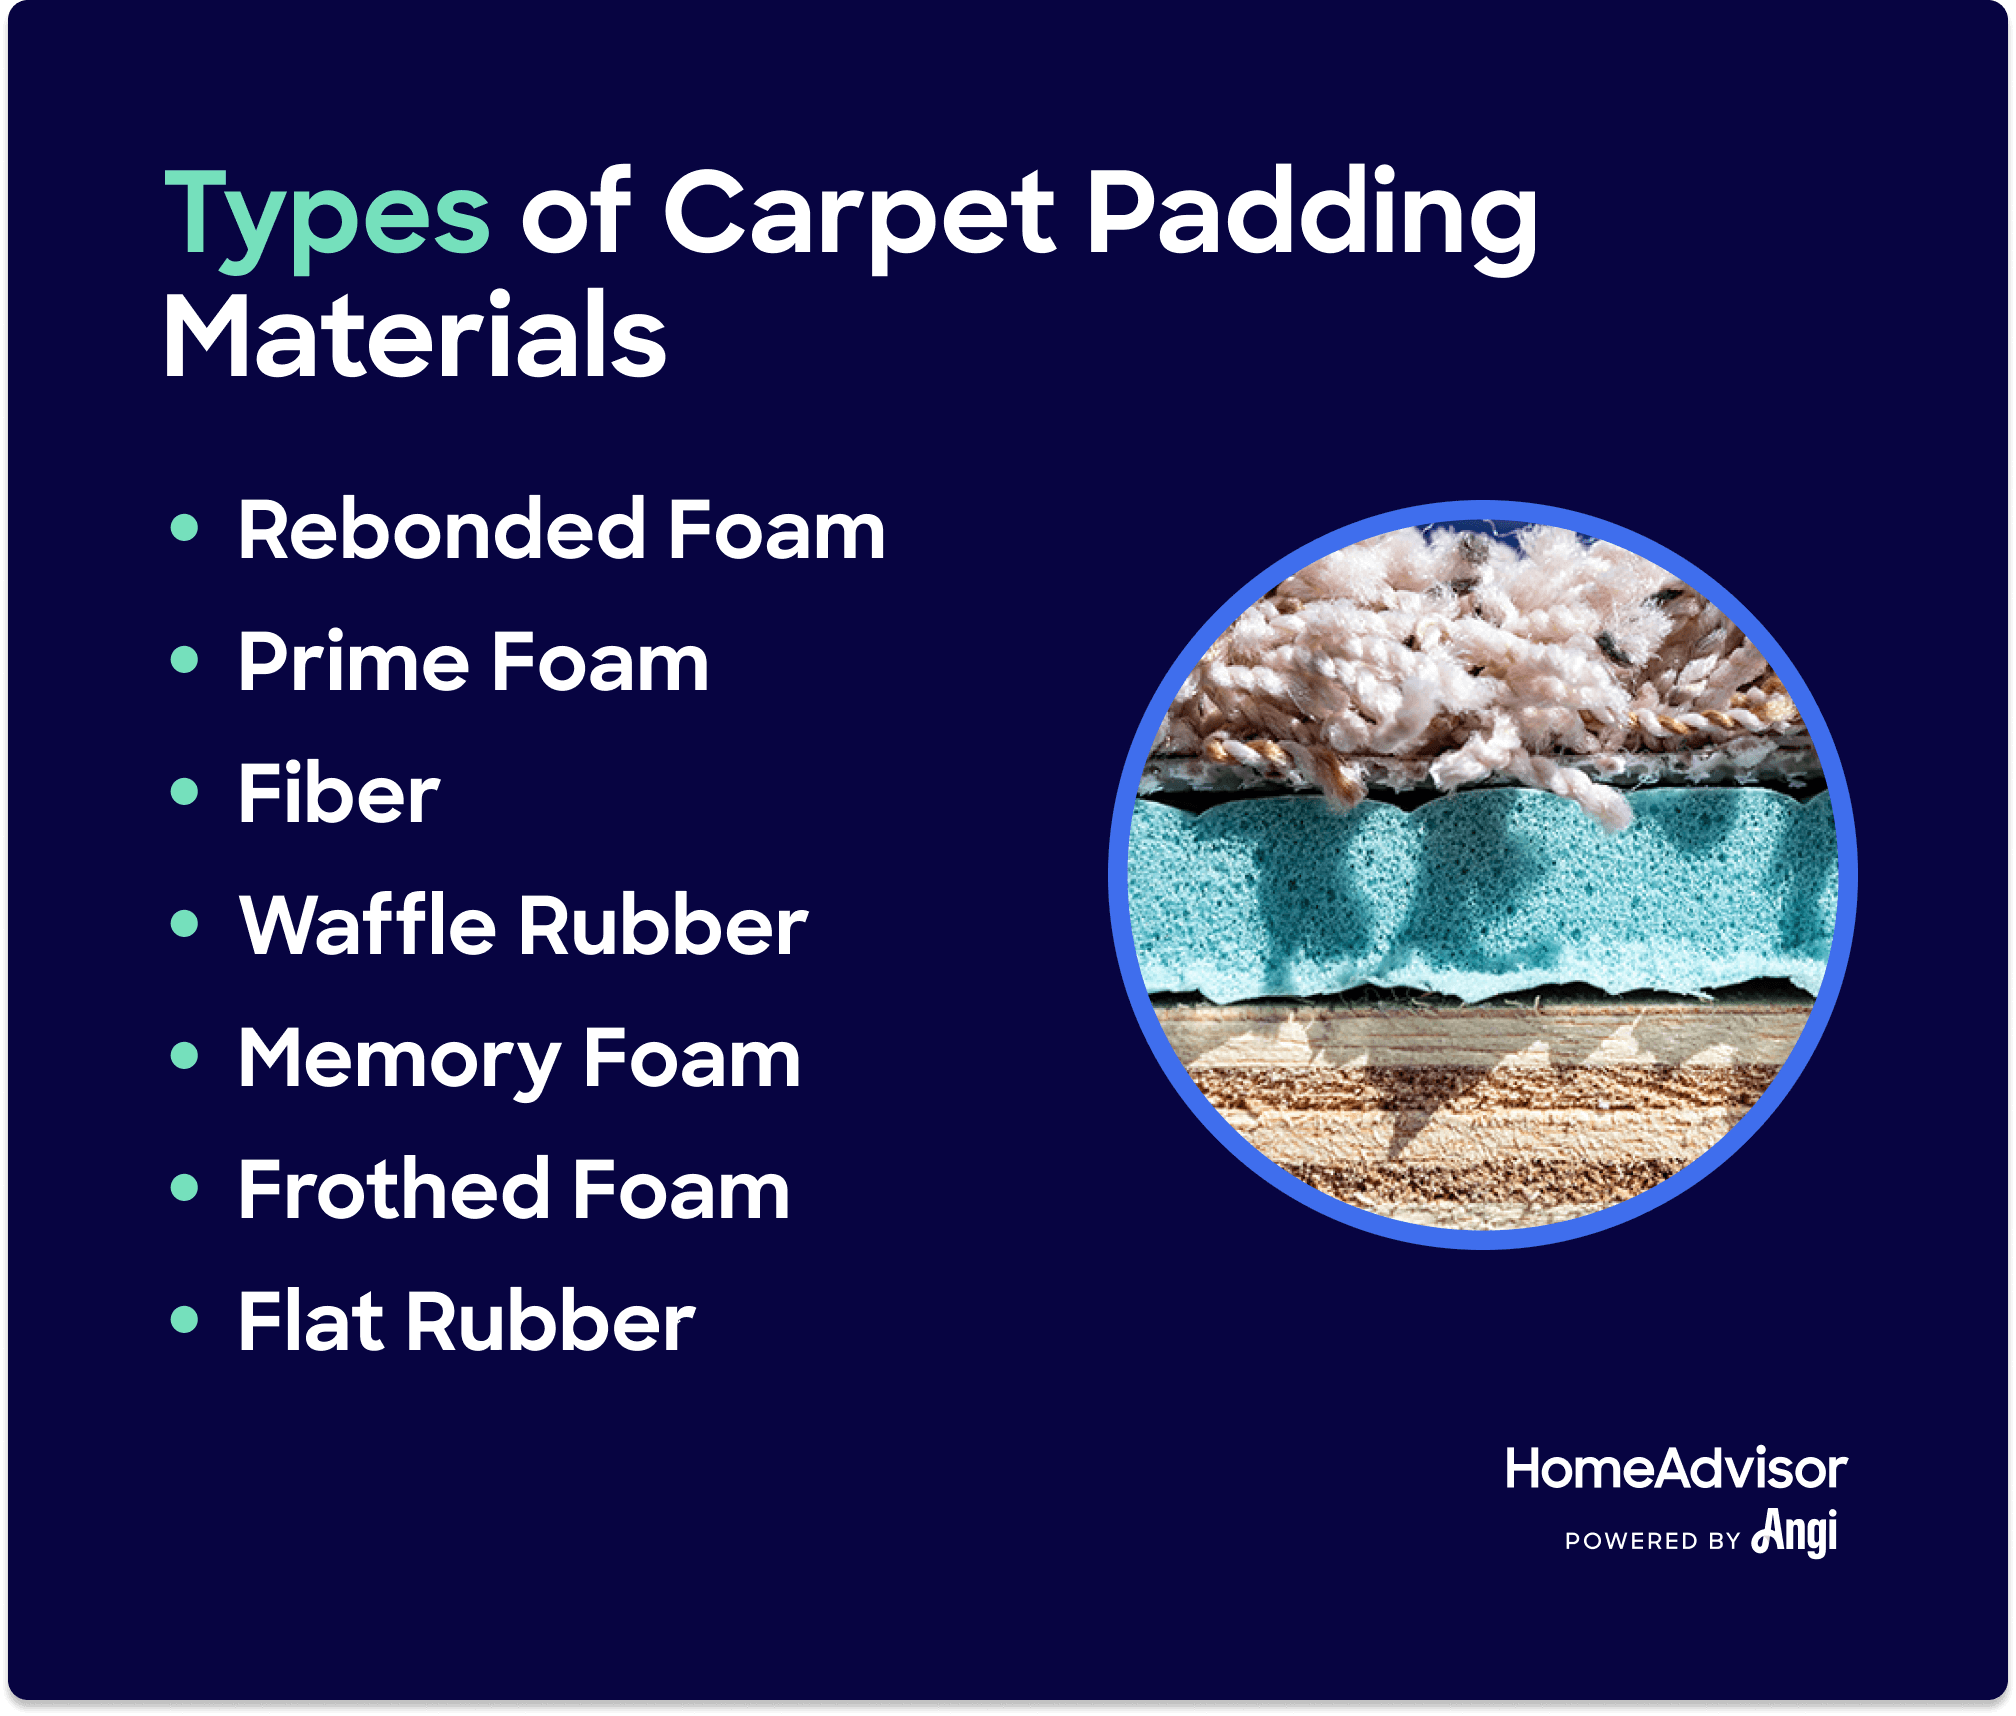 https://images.ctfassets.net/jarihqritqht/1oFThTjOACcvI4bJ6RQur6/fb93e630d3d441d7ea3652f0f02a892e/carpet-pad-material-types.png